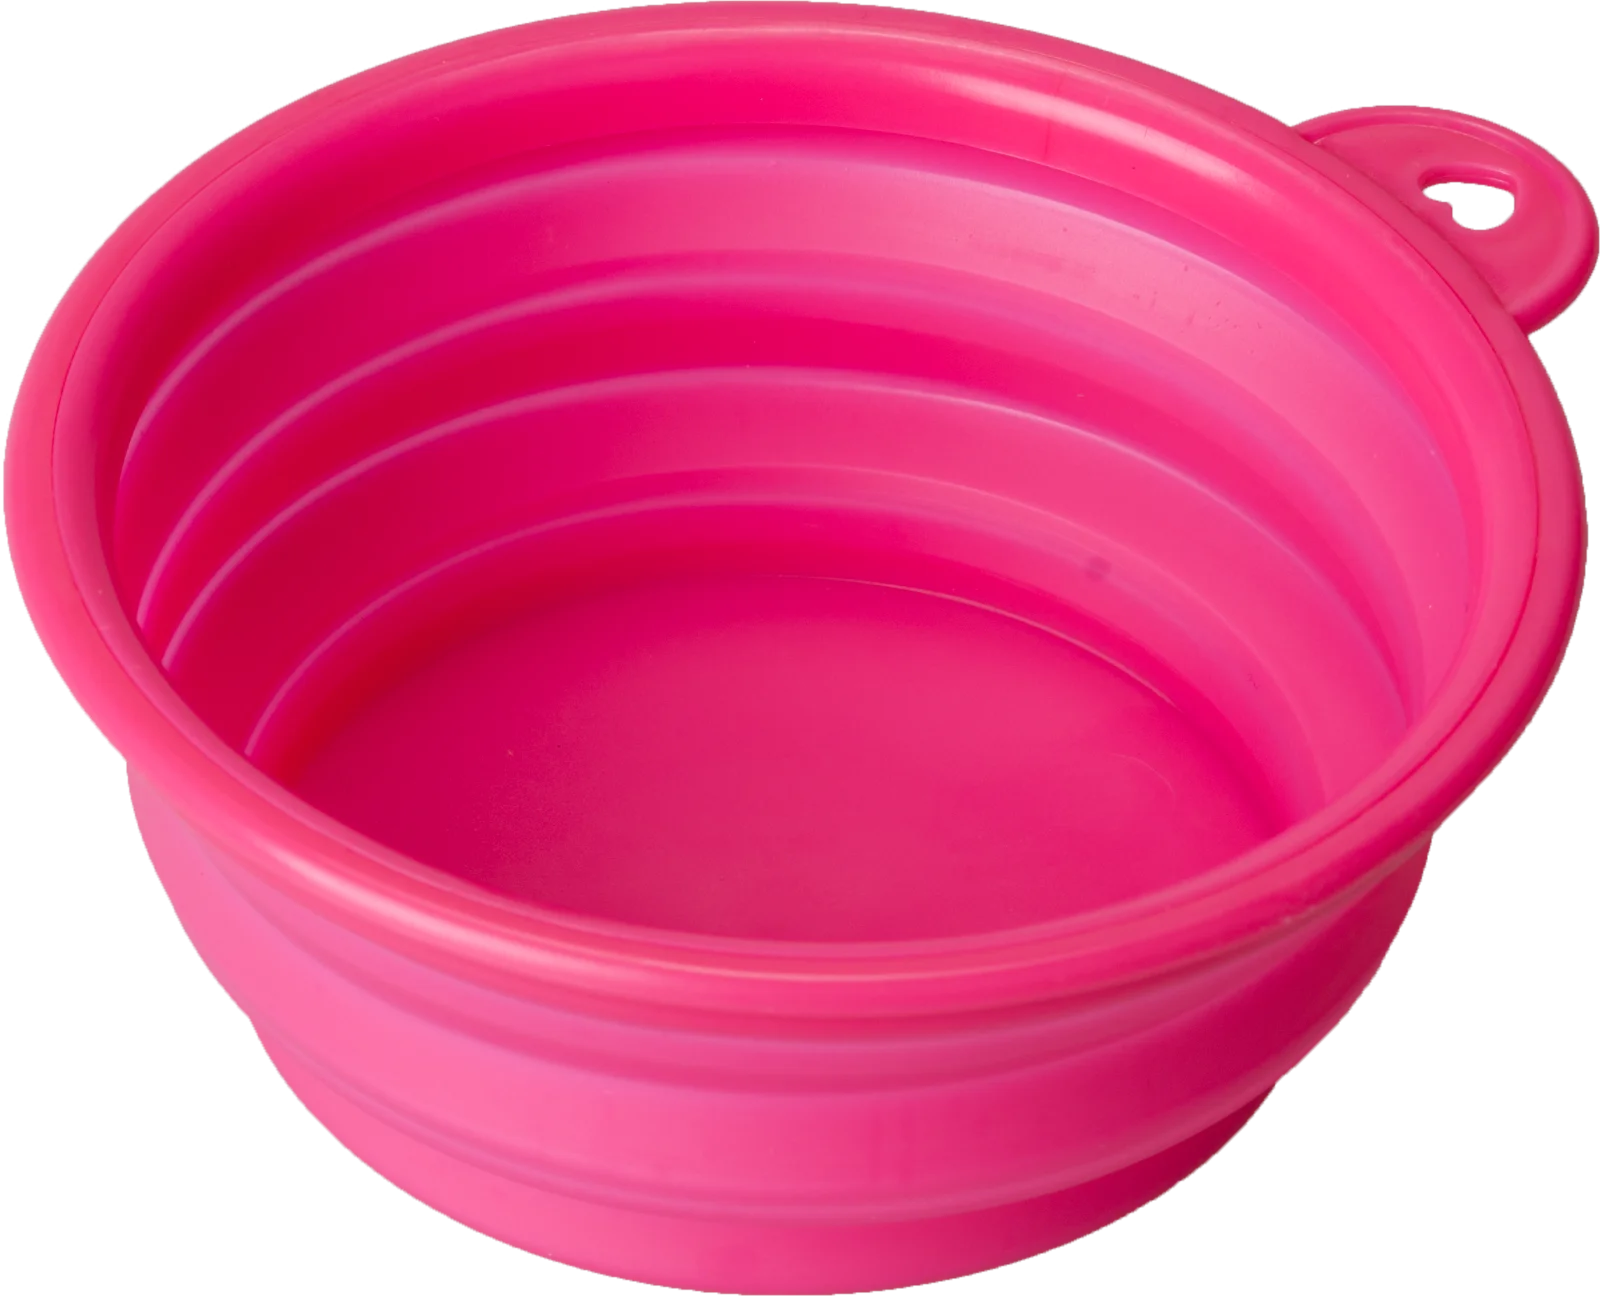 Collapsible Pet Dog Cat Feeding Bowl Pop Up Compact Travel Silicone Dish Feeder 